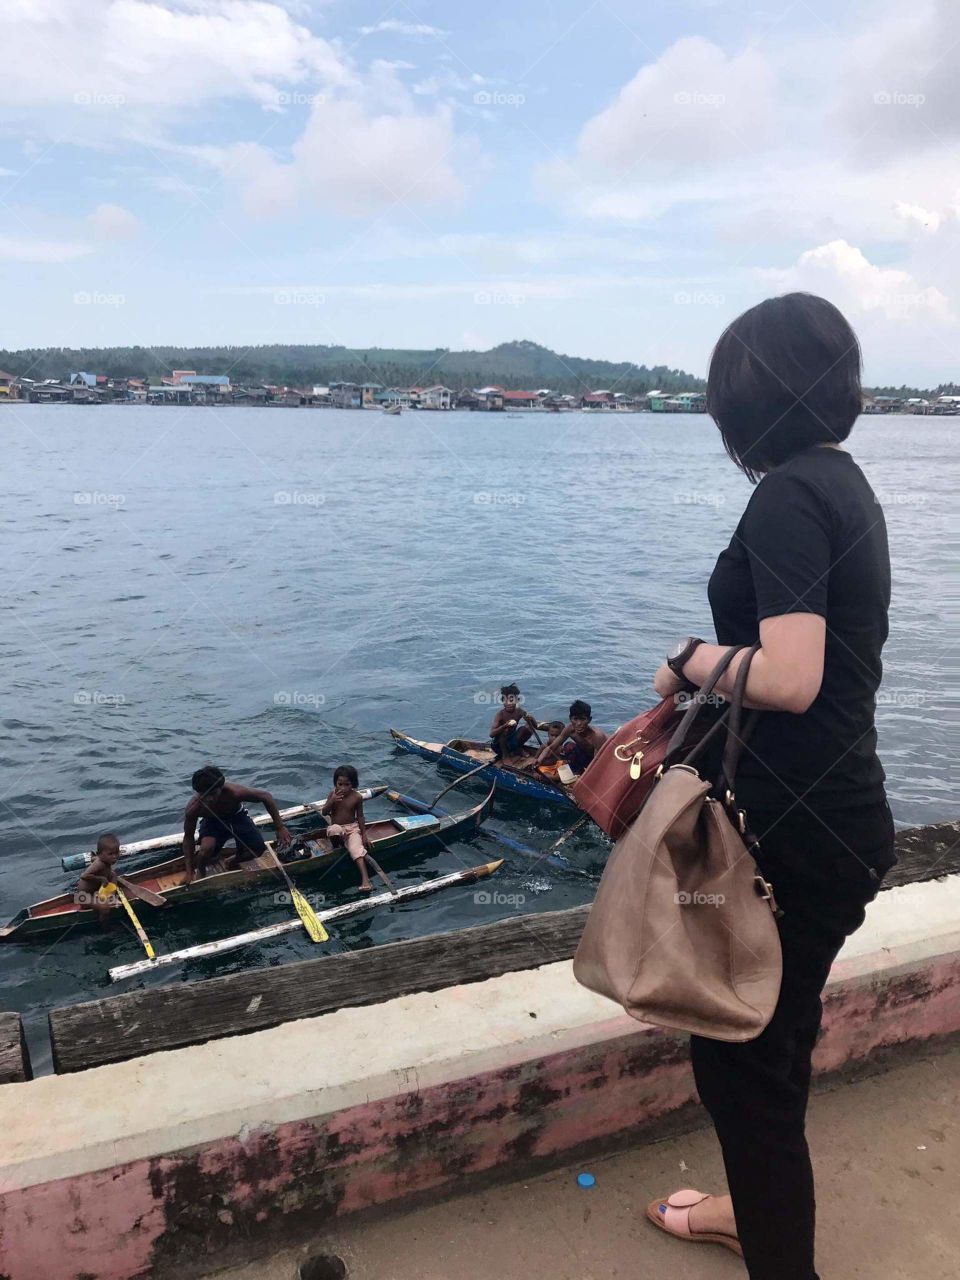 Basilan Province
Philippines
They are coins divers..the Badjaos or sea gypsies.. 
They won't take free money they will want you to throw the coins in the water and they will show off their diving skills